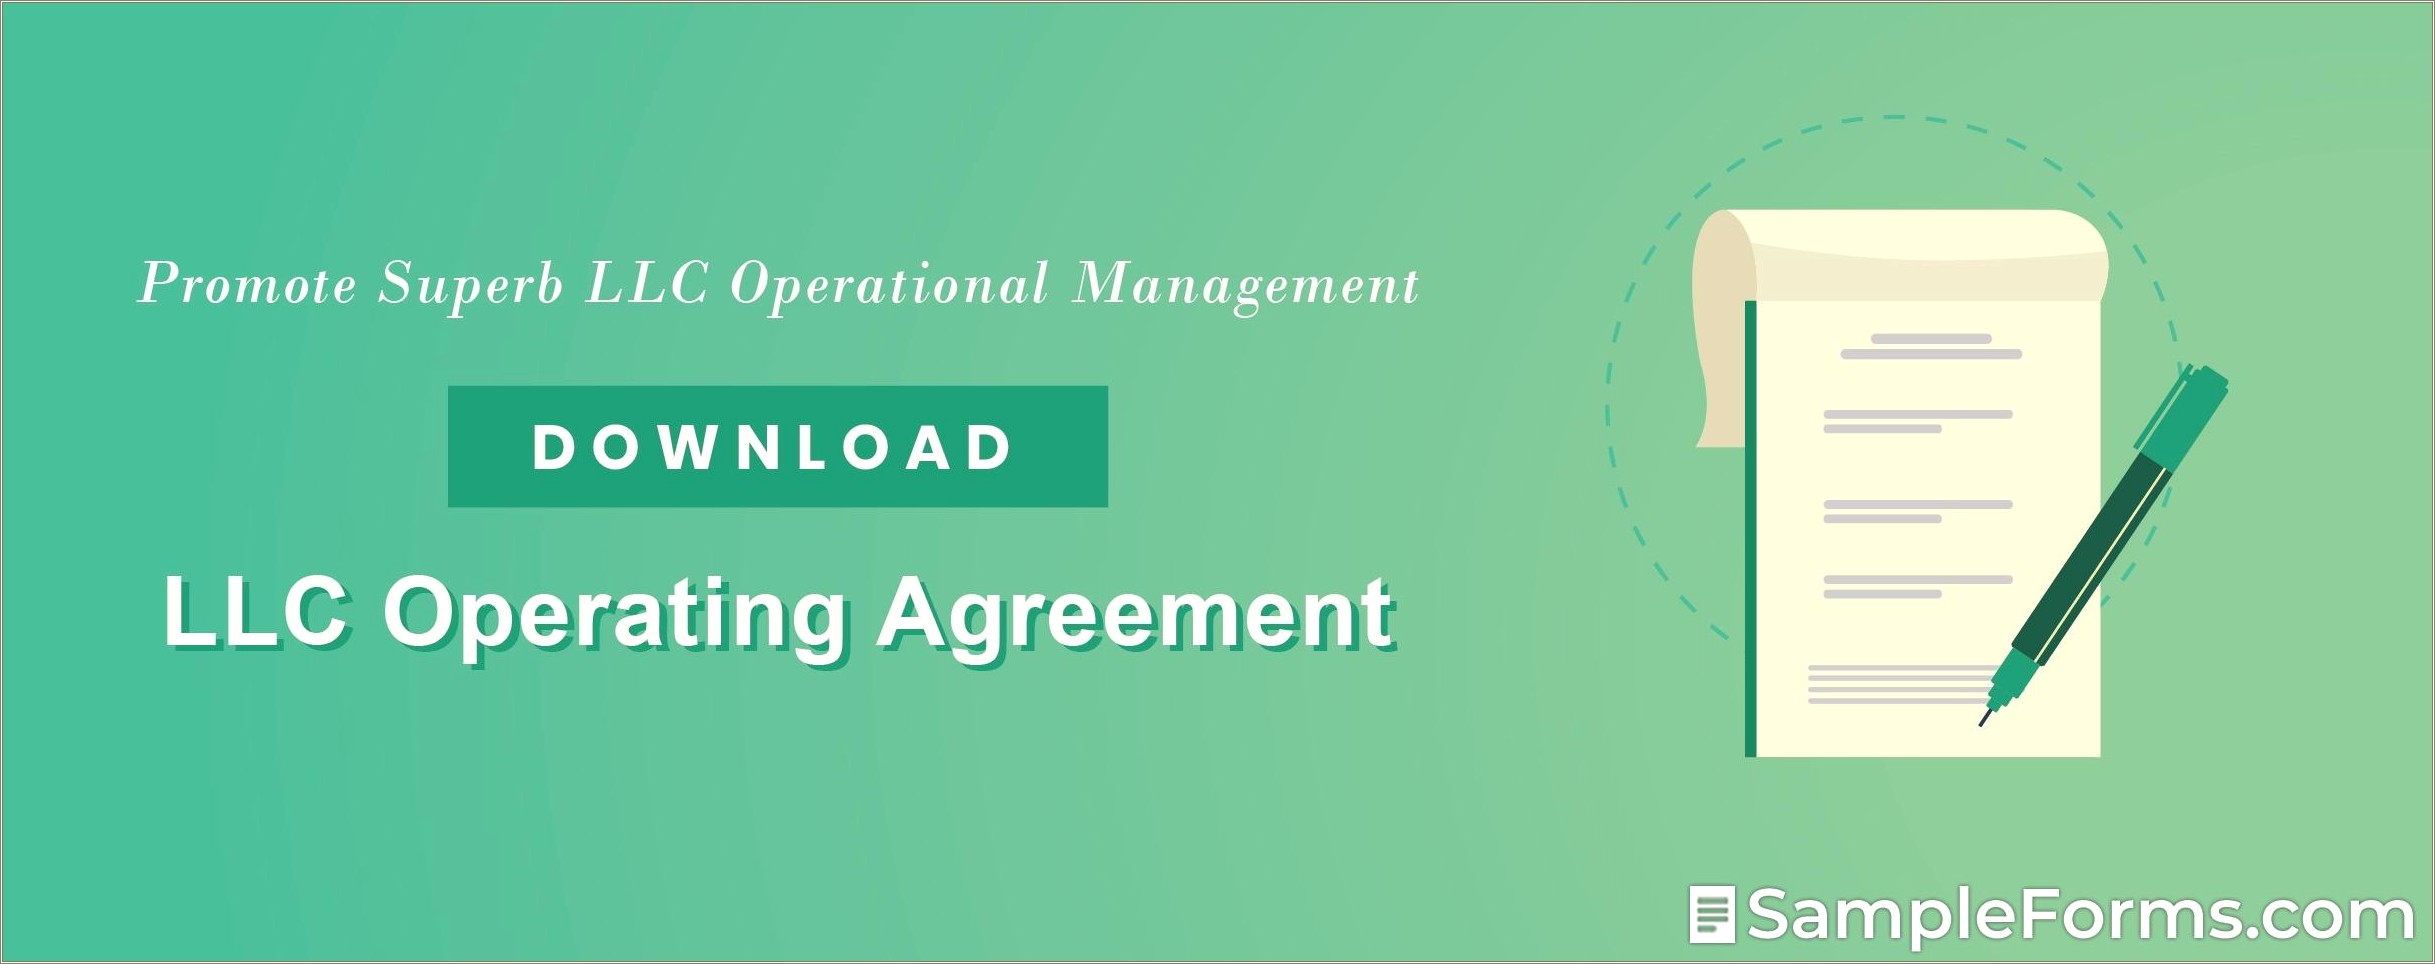 Free Templates For Wyoming Llc Operating Agreements